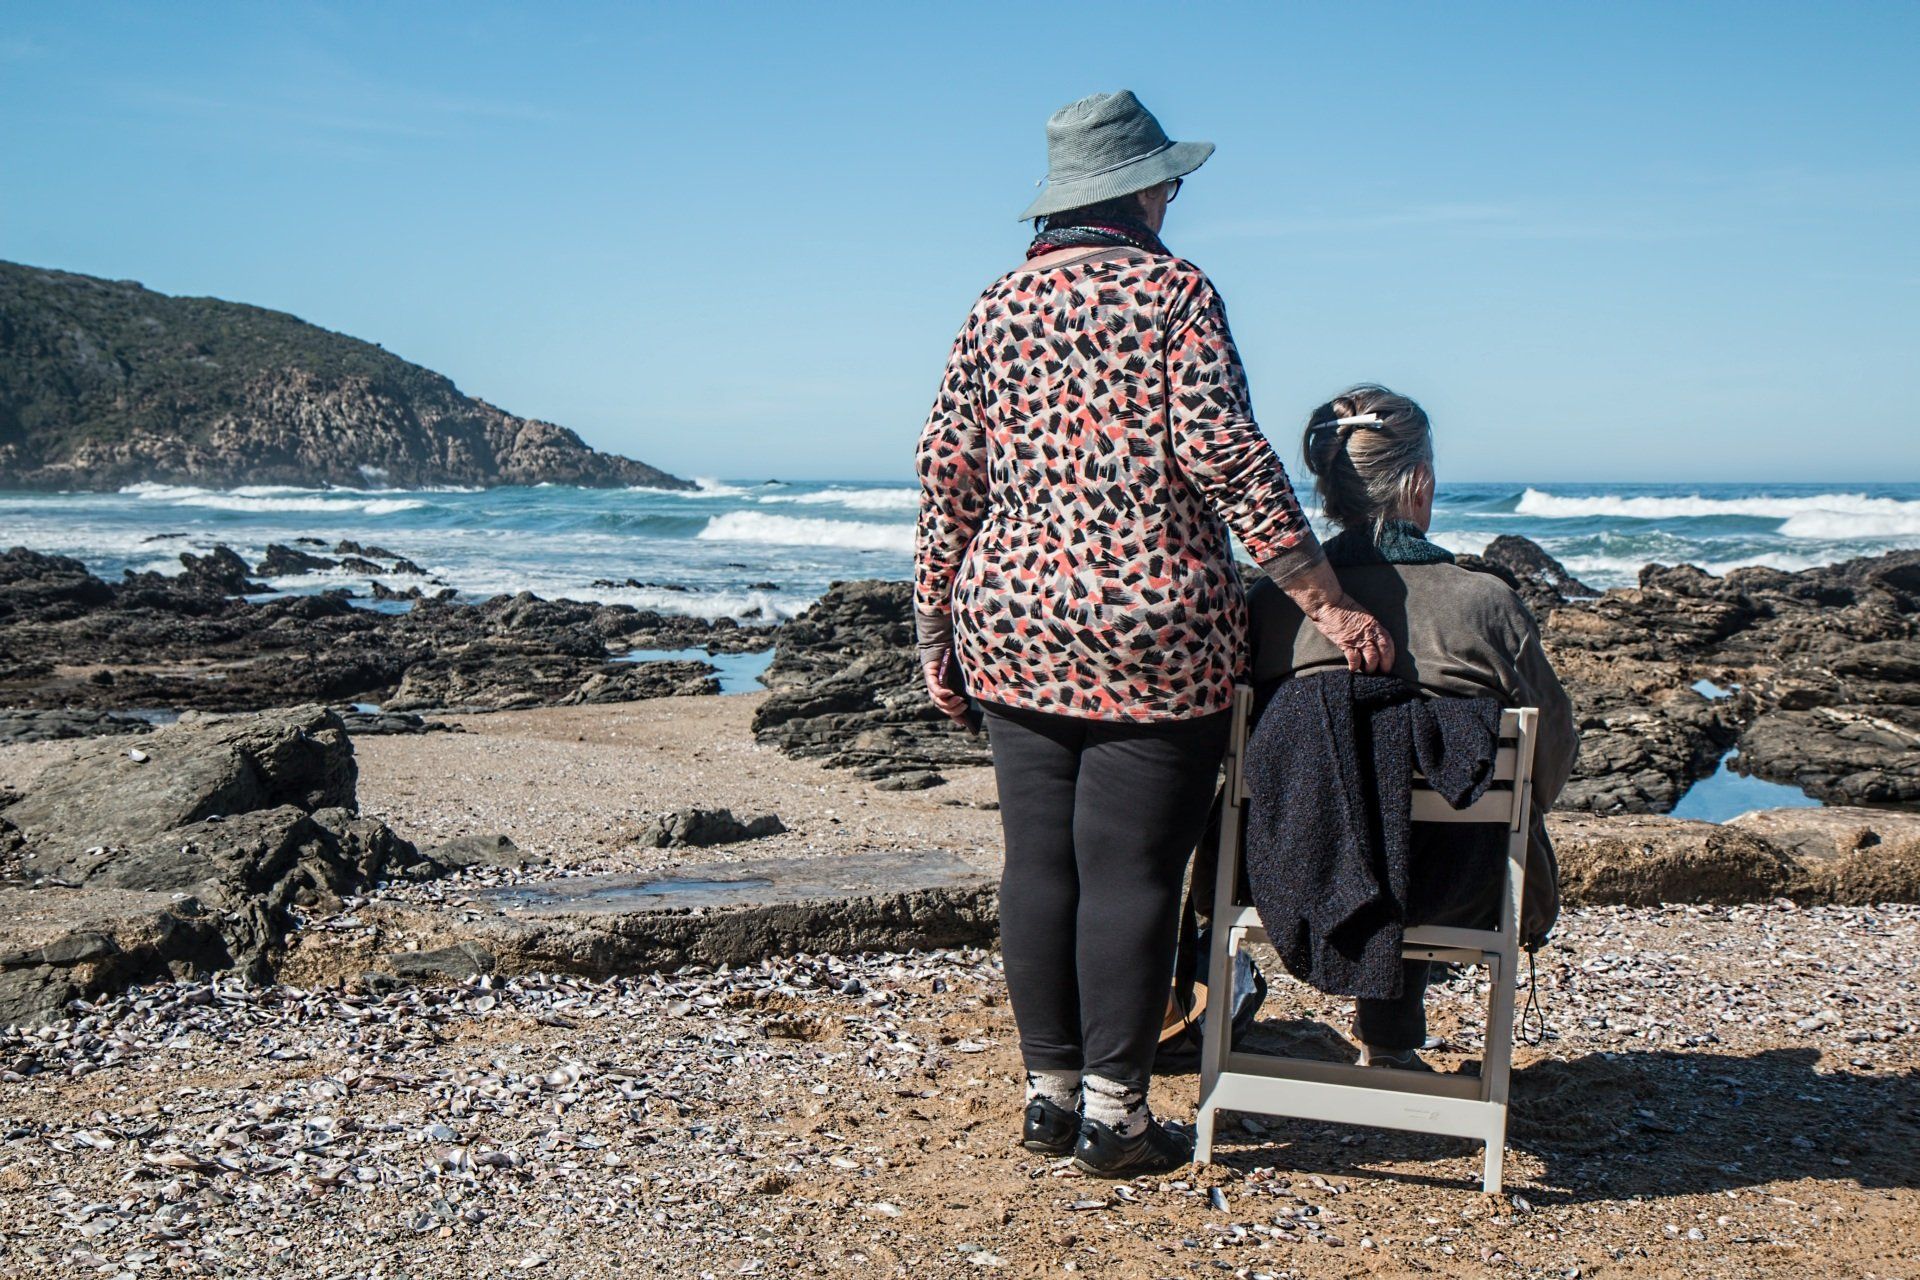 A woman is standing next to a woman in a wheelchair on the beach.